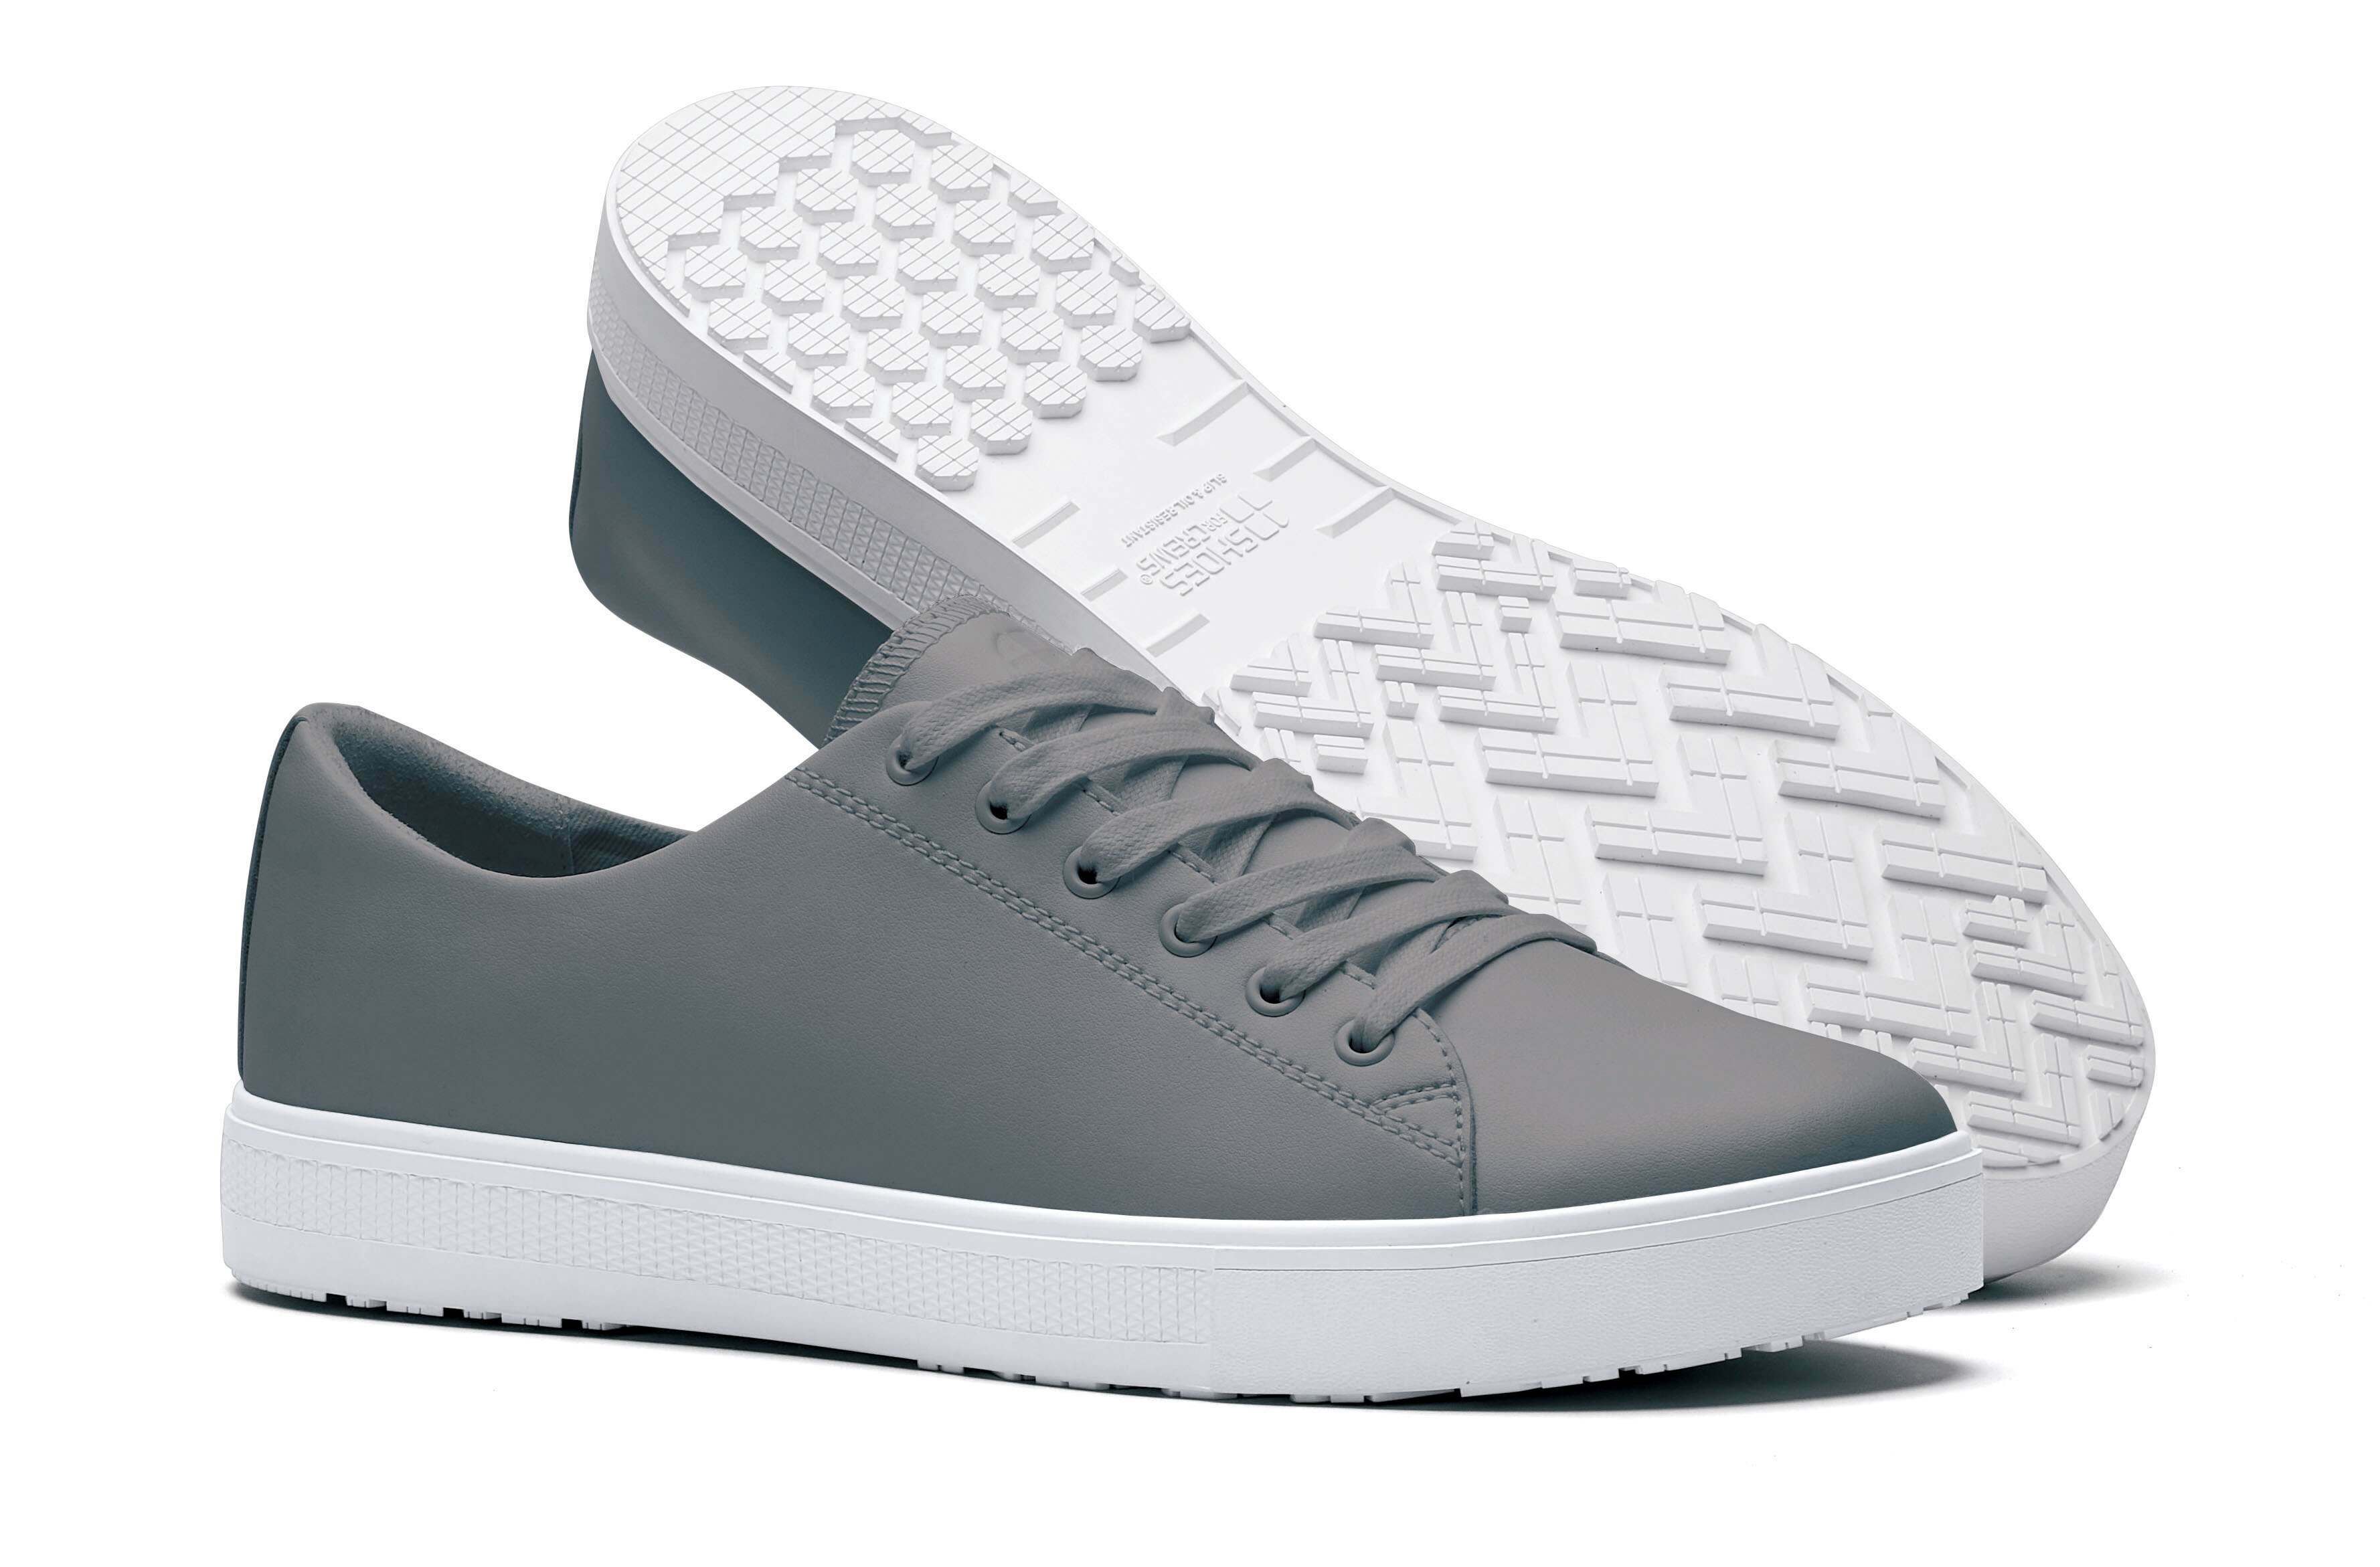 The Old School Low-Rider Wild Dove from Shoes For Crews is a slip resistant lace-up shoe designed to provide comfort throughout the day, pair seen from the left side and the sole.